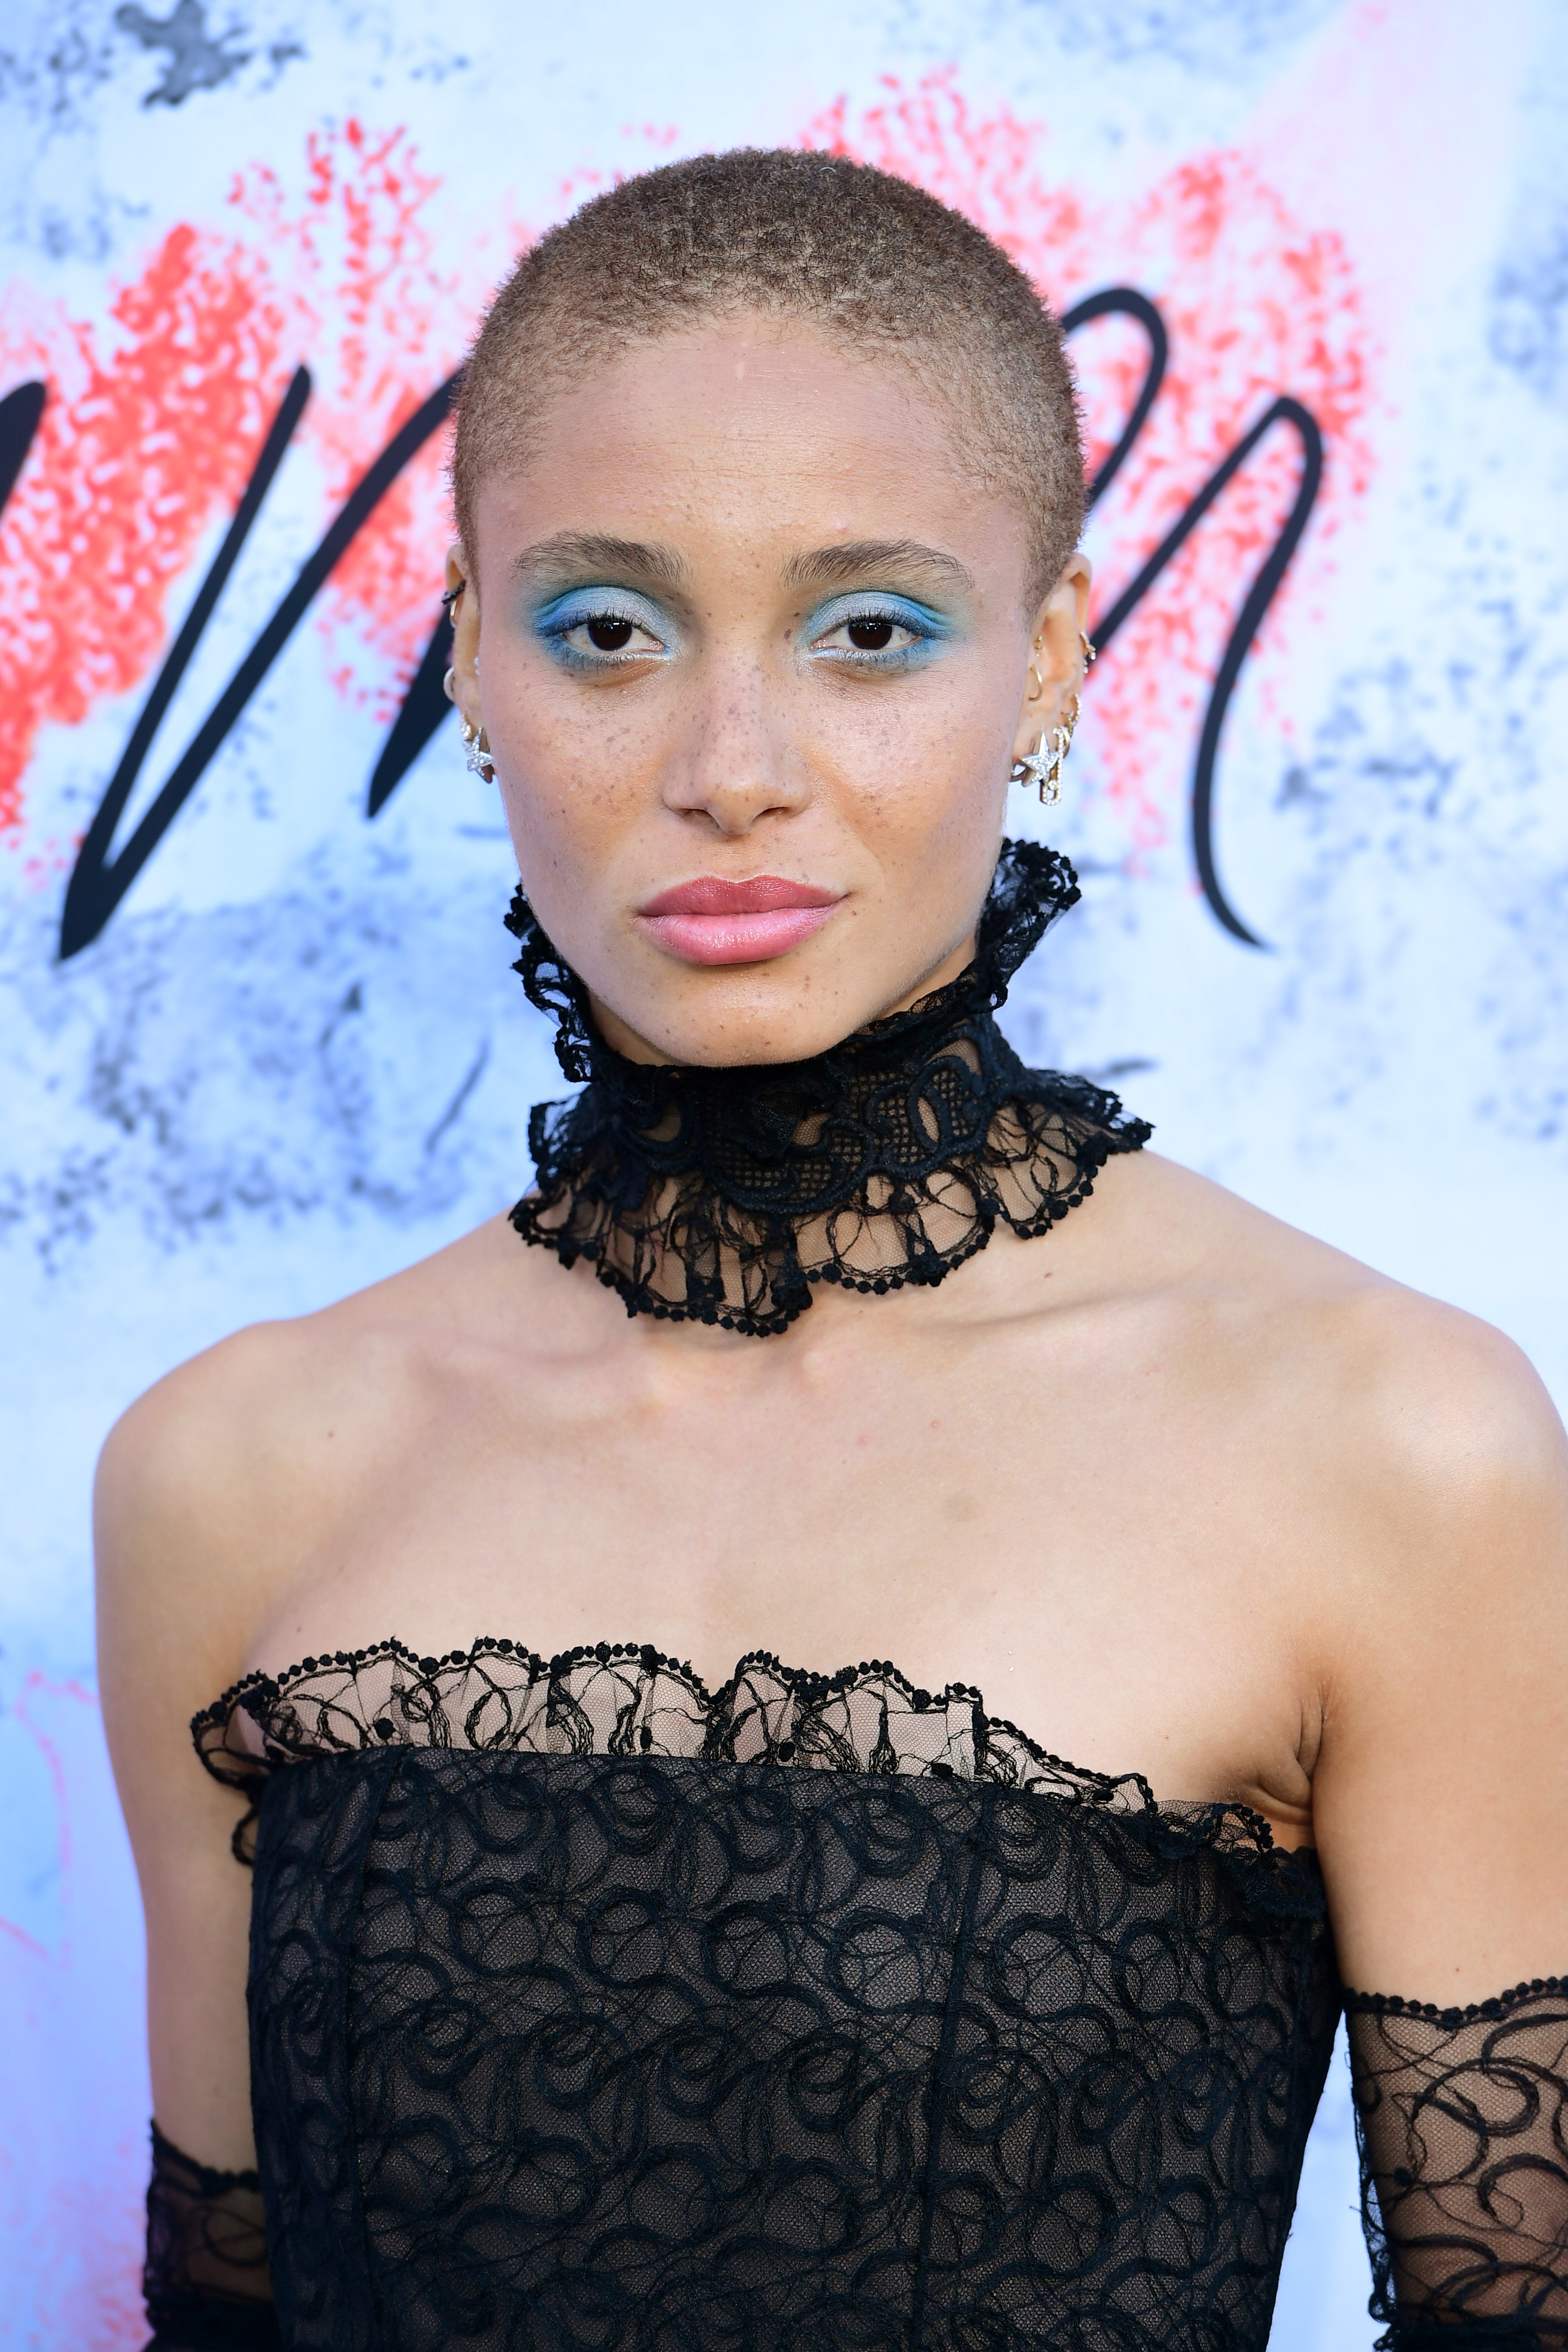 Adwoa Aboah attending the Serpentine Summer Party